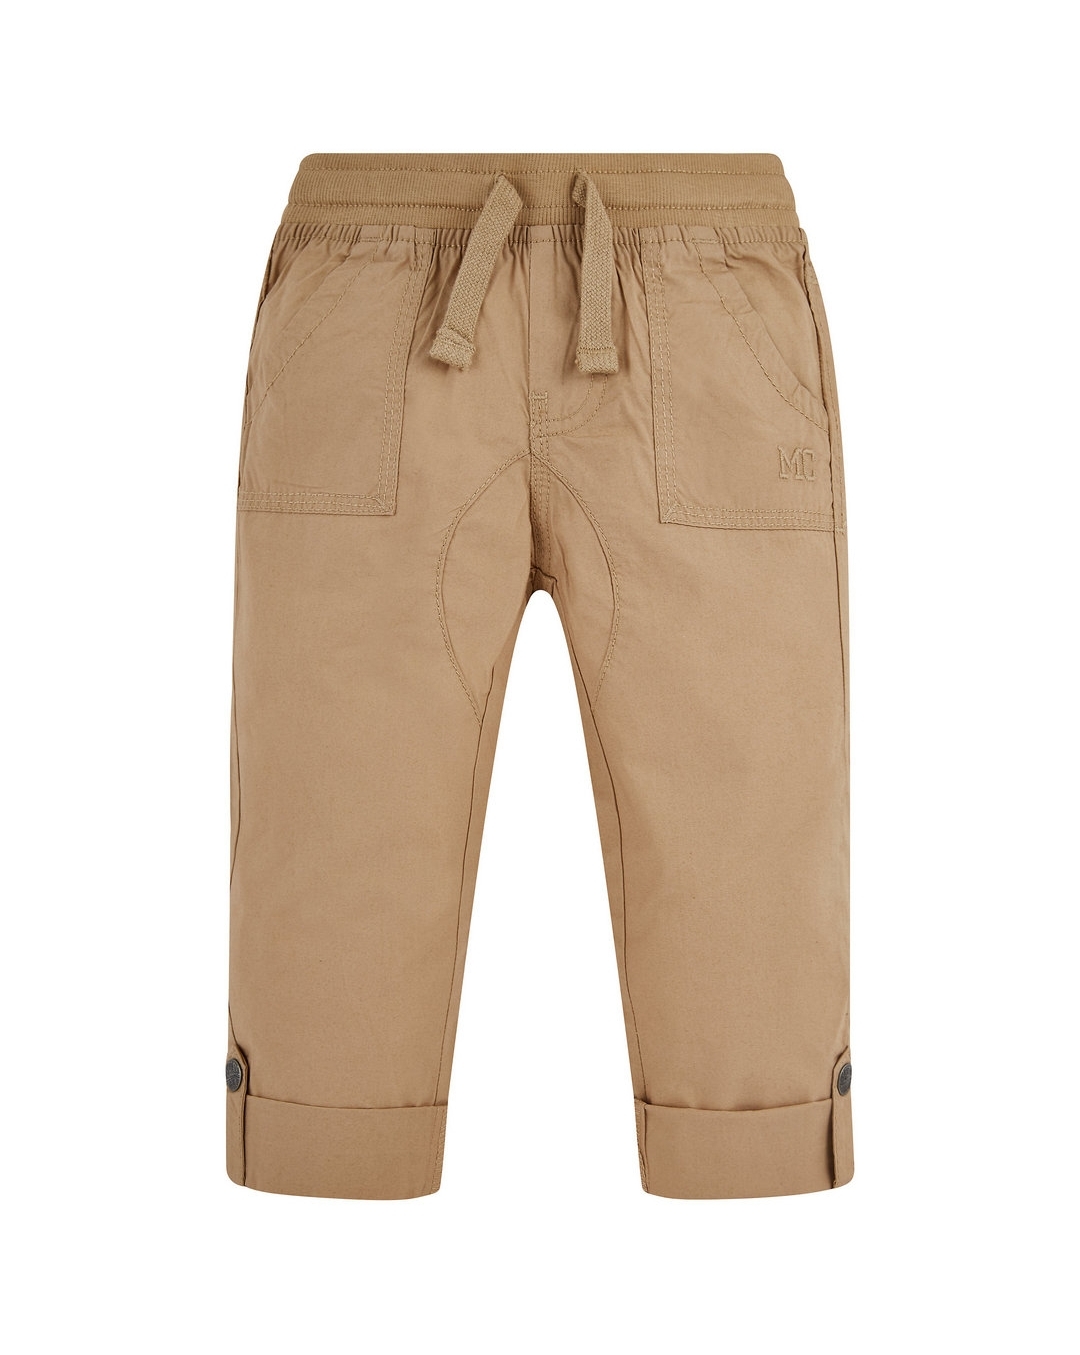 Roadster Convertible Trousers  Buy Roadster Convertible Trousers online in  India